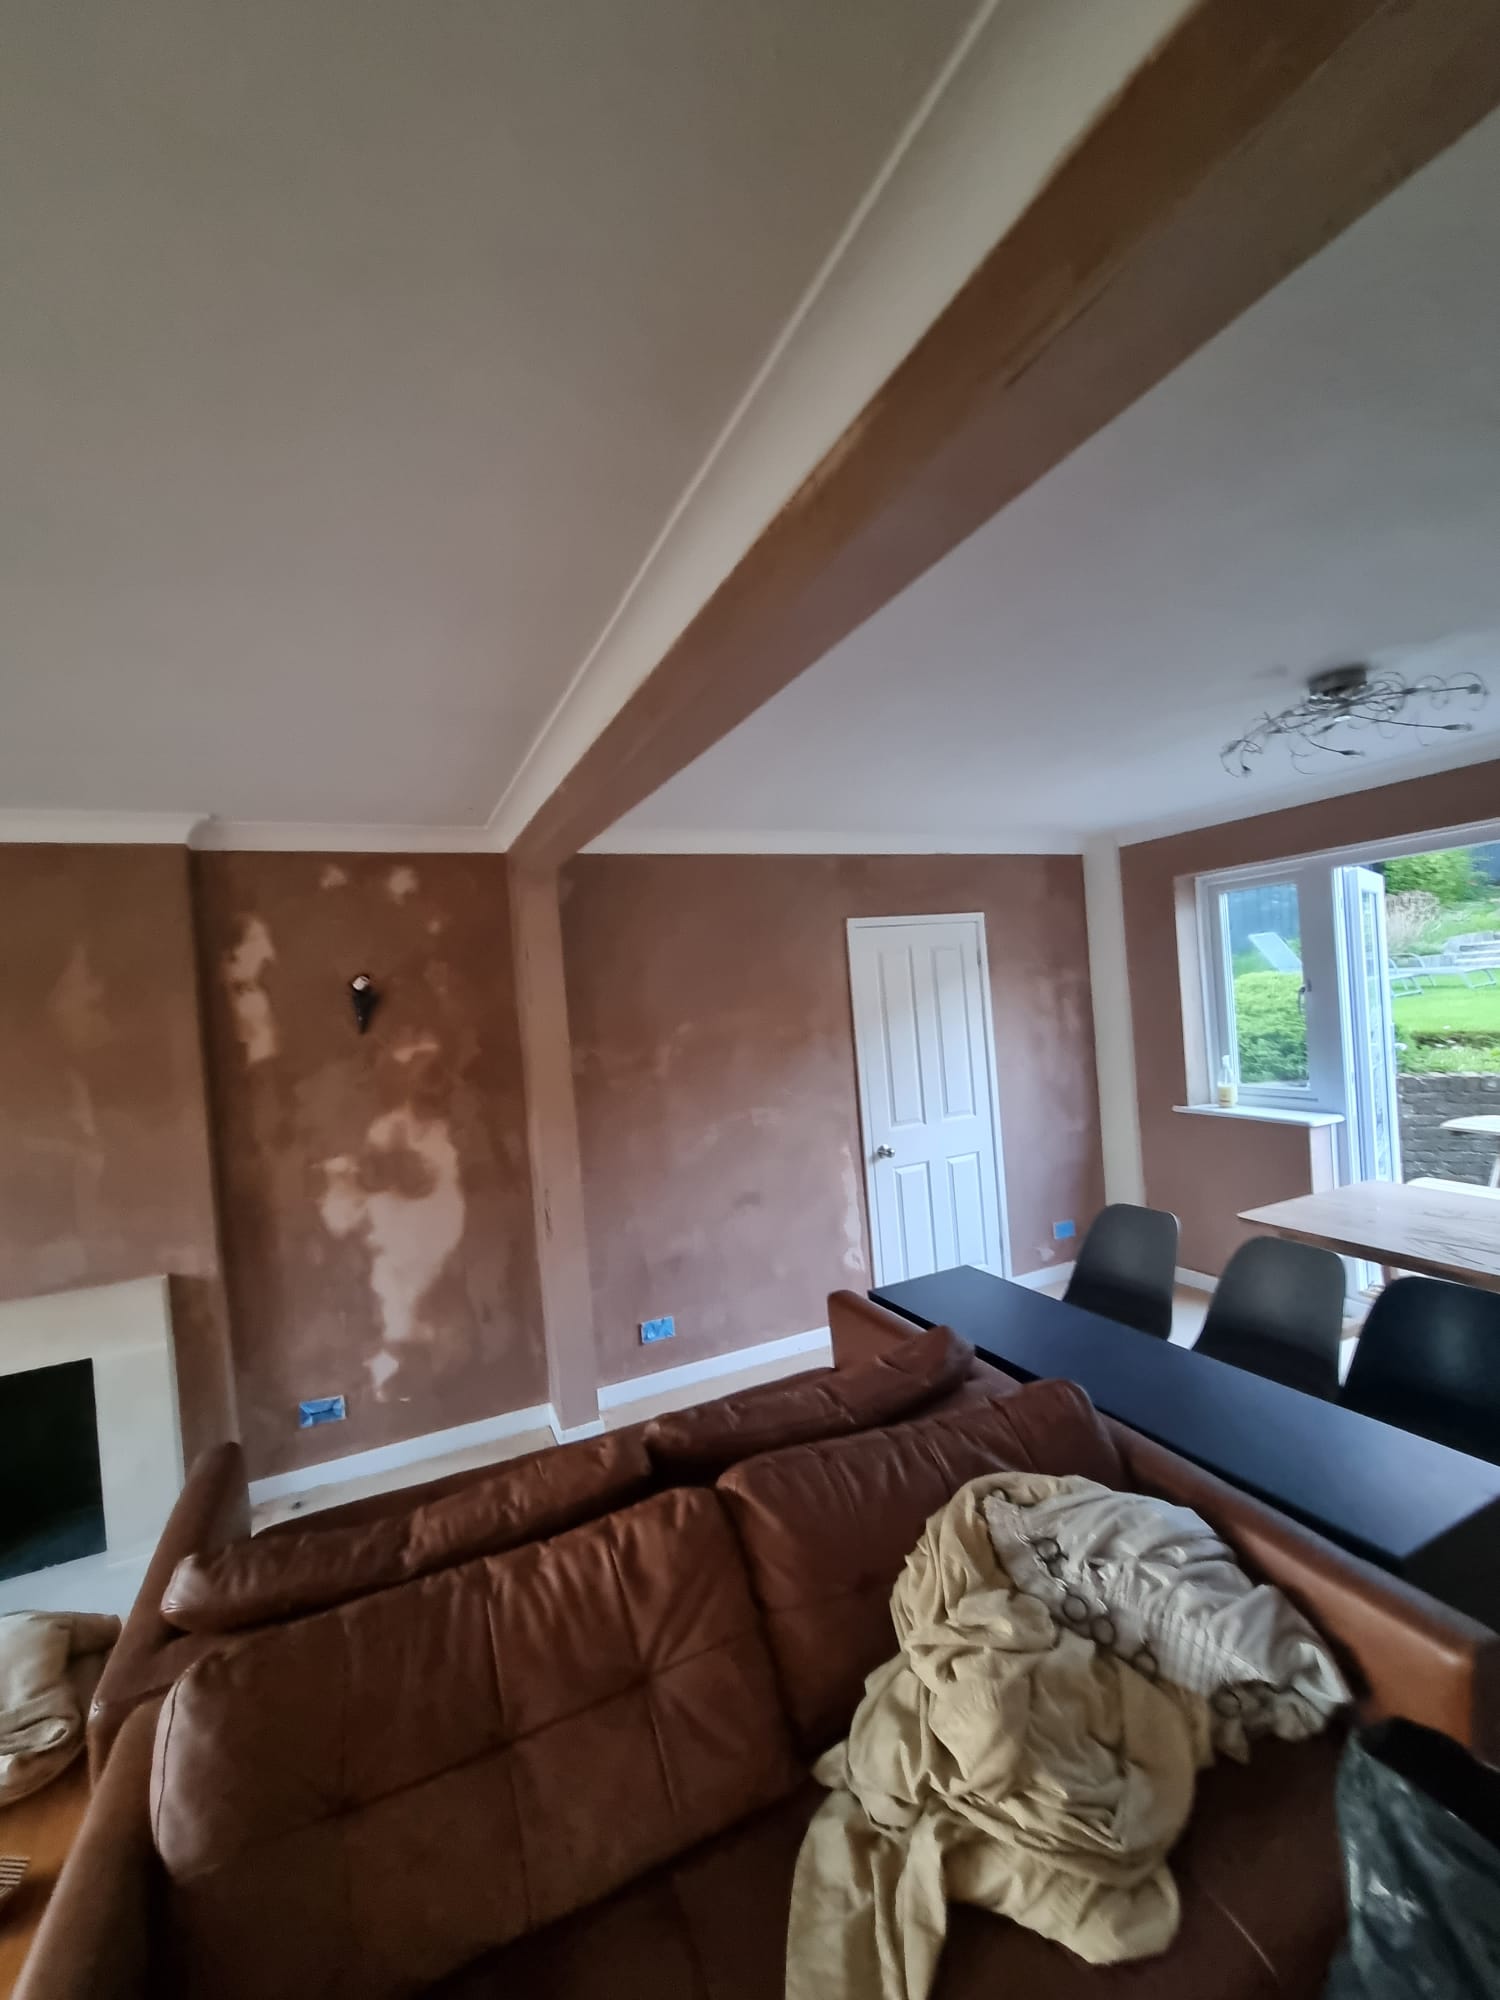 Plastering Contractor Services in London